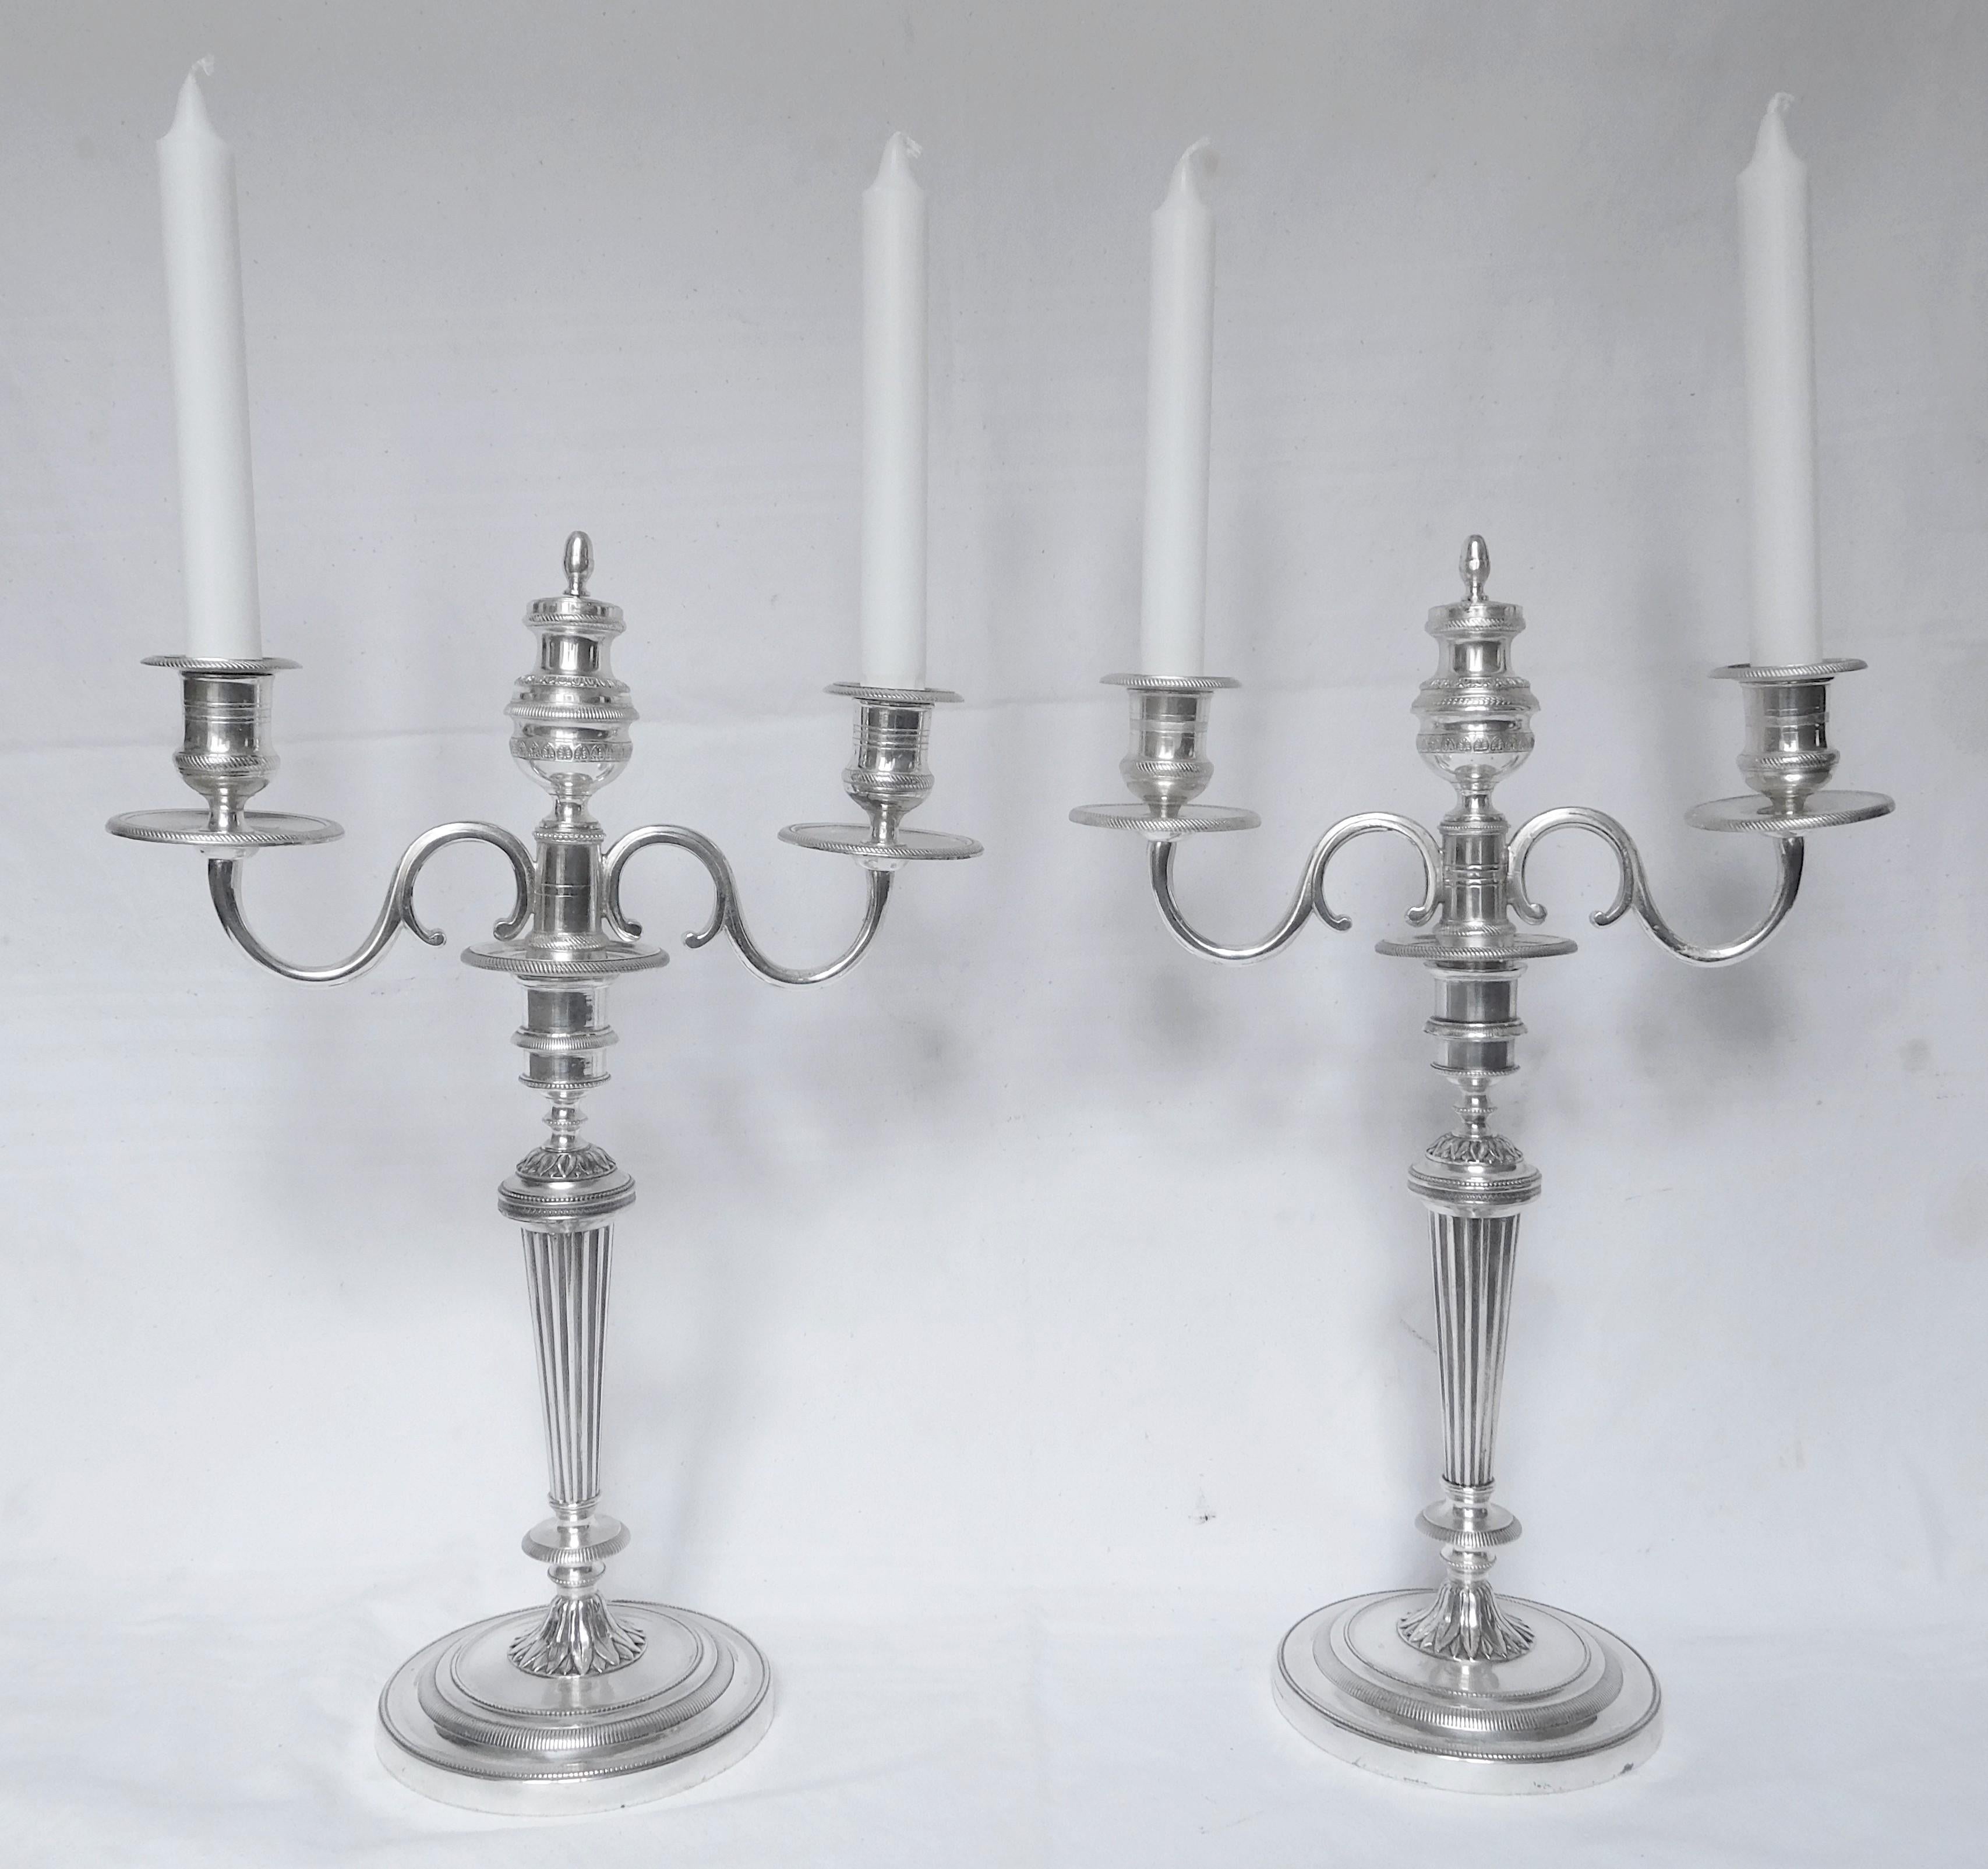 Rare pair of silver plate bronze candelabras, early 19th century production (Empire period).
Beautiful Louis XVI style model, elegant proportions, 2 to 3 lights each (you can turn the center piece over to get a third light).
They are composed of 17